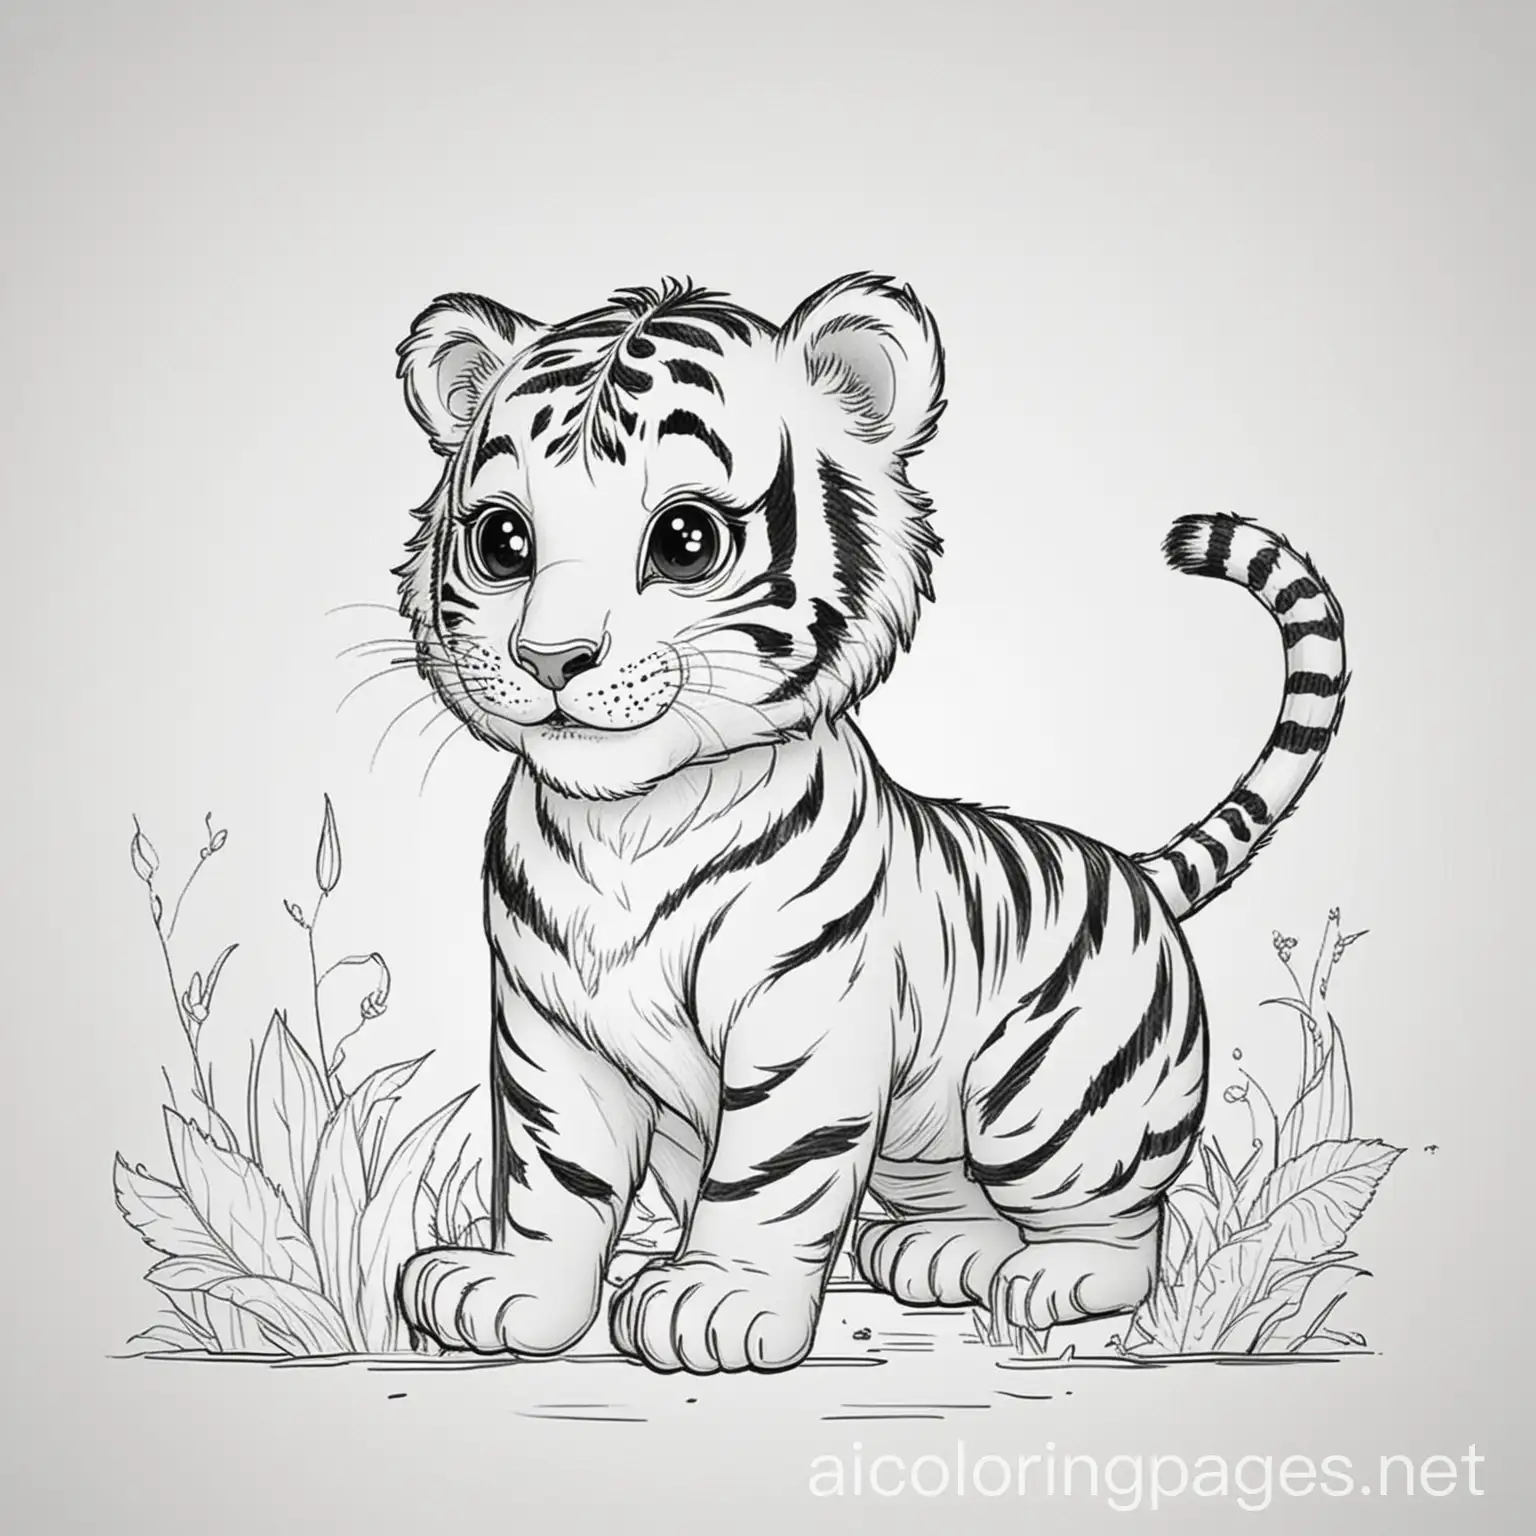 happy tiger Image. Image should be Black and white. Age group 3 . , Coloring Page, black and white, line art, white background, Simplicity, Ample White Space. The background of the coloring page is plain white to make it easy for young children to color within the lines. The outlines of all the subjects are easy to distinguish, making it simple for kids to color without too much difficulty., Coloring Page, black and white, line art, white background, Simplicity, Ample White Space. The background of the coloring page is plain white to make it easy for young children to color within the lines. The outlines of all the subjects are easy to distinguish, making it simple for kids to color without too much difficulty